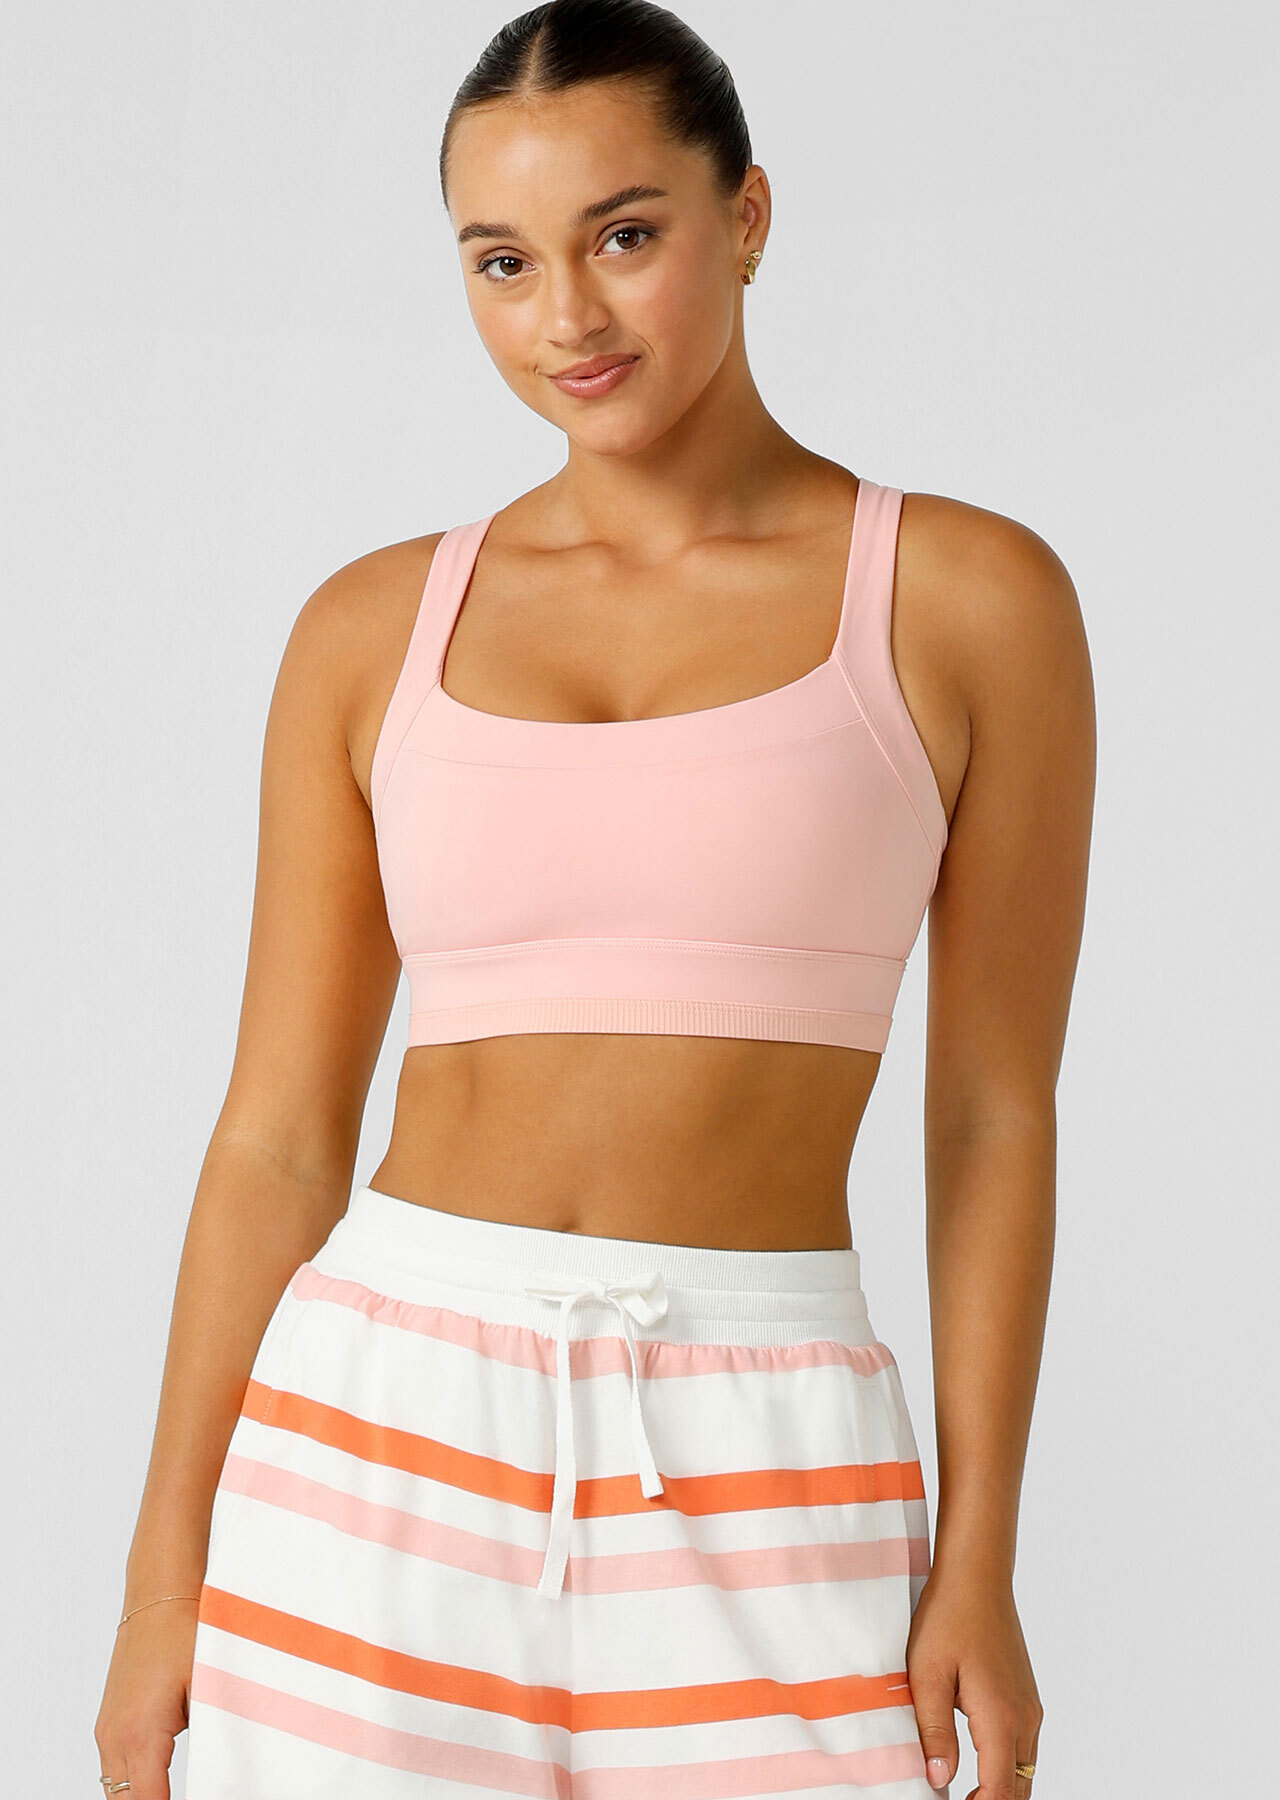 Lorna Jane THE ONE Sports Bra in White, Women's Fashion, Activewear on  Carousell